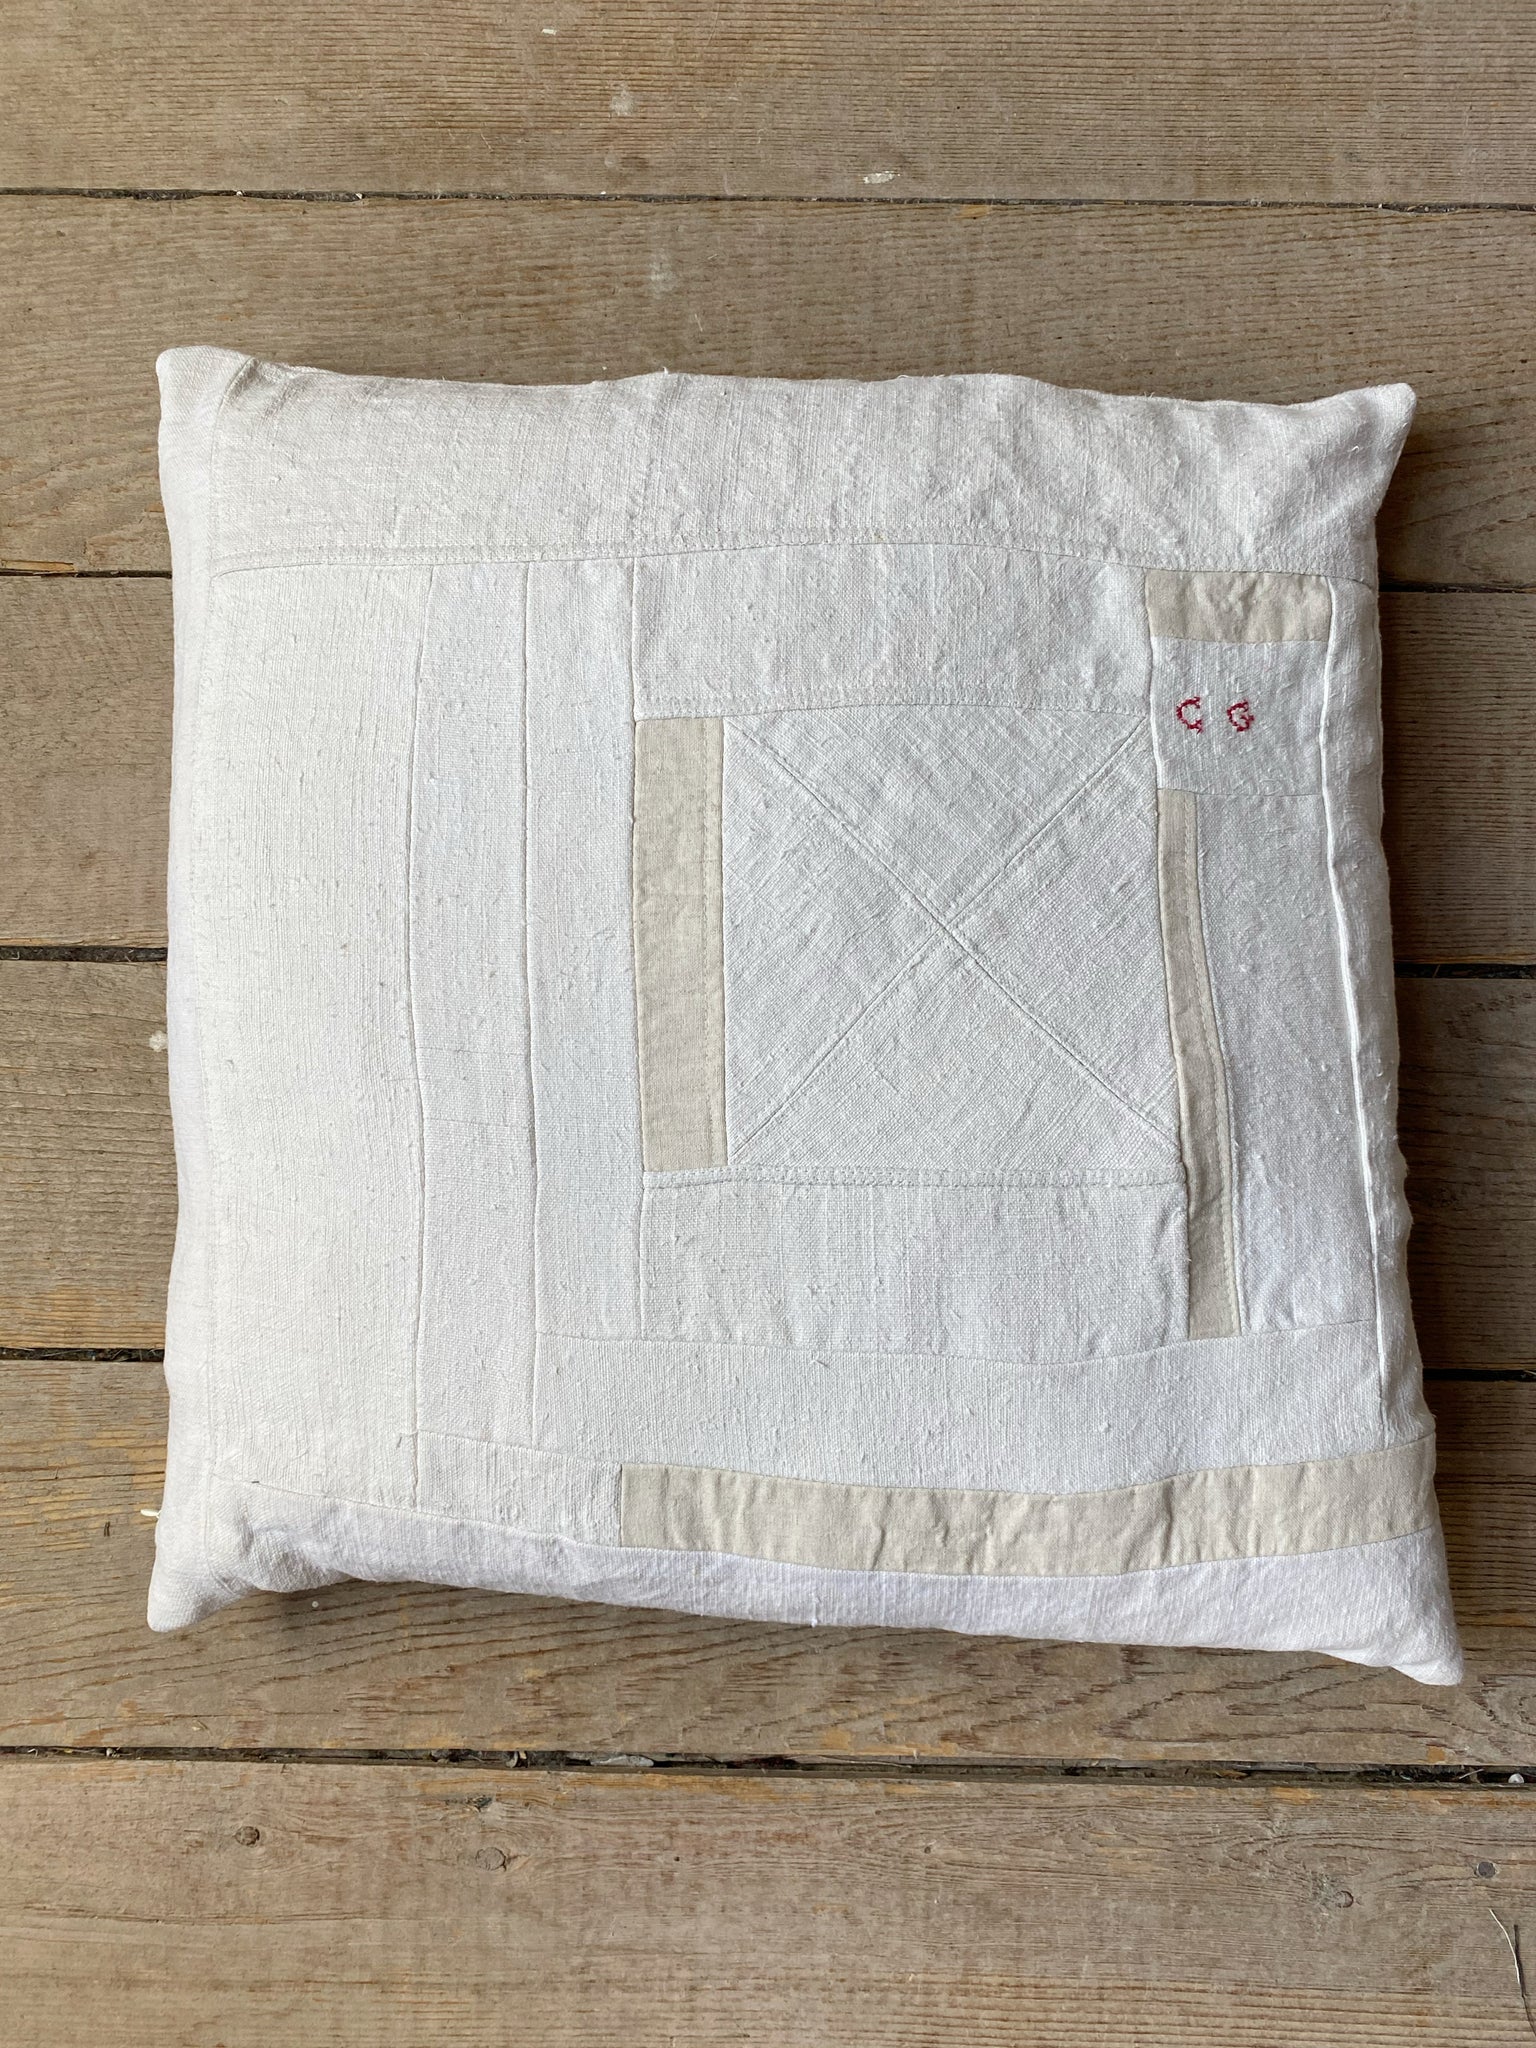 patched linen and cotton french 18th century monogram pillow #3